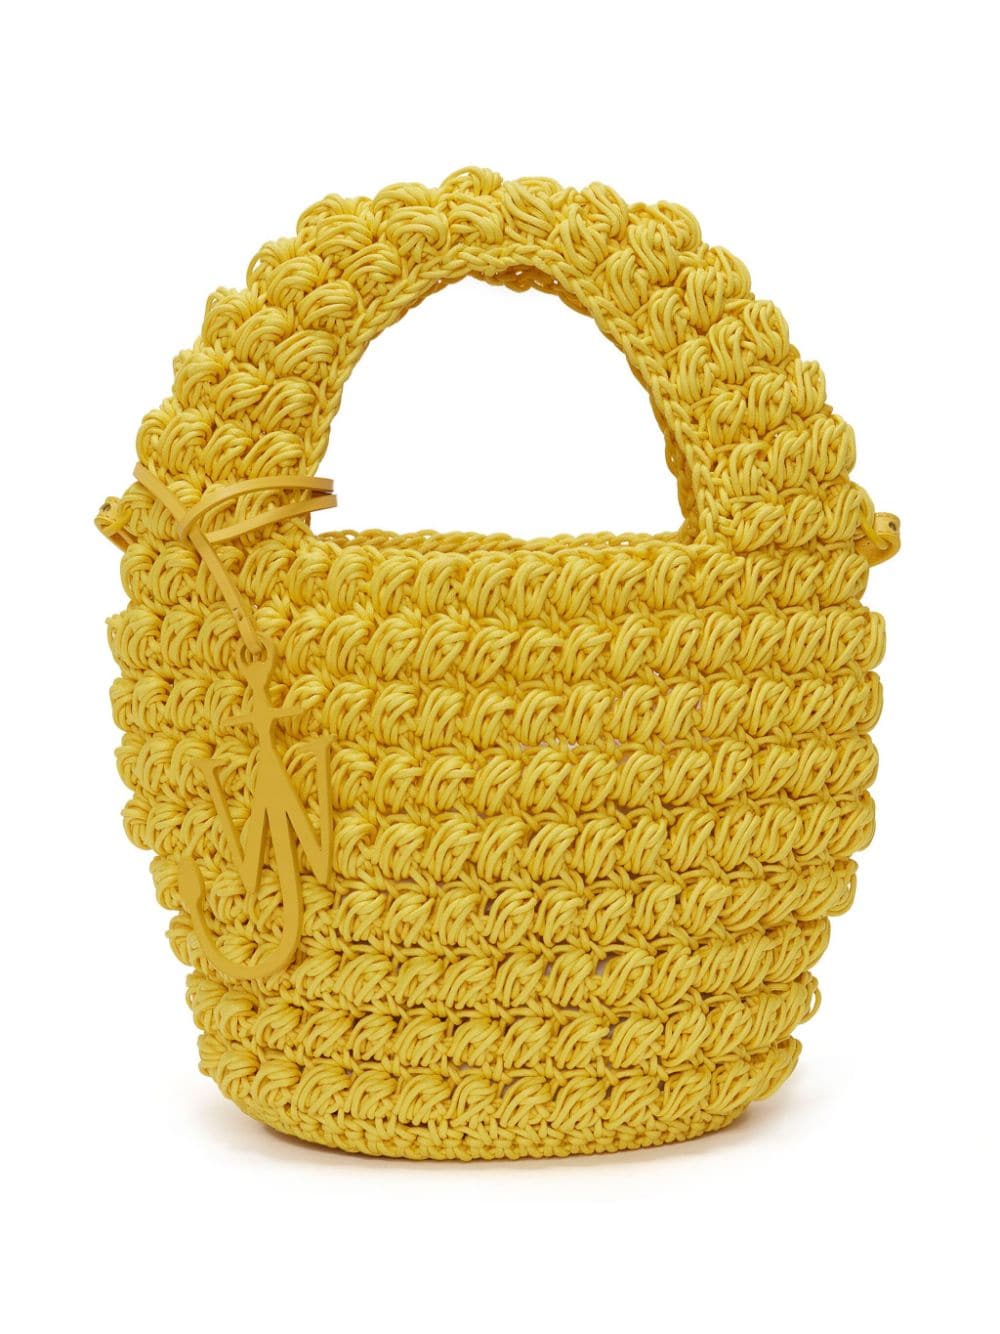 JW Anderson Popcorn knitted tote bag - Yellow von JW Anderson